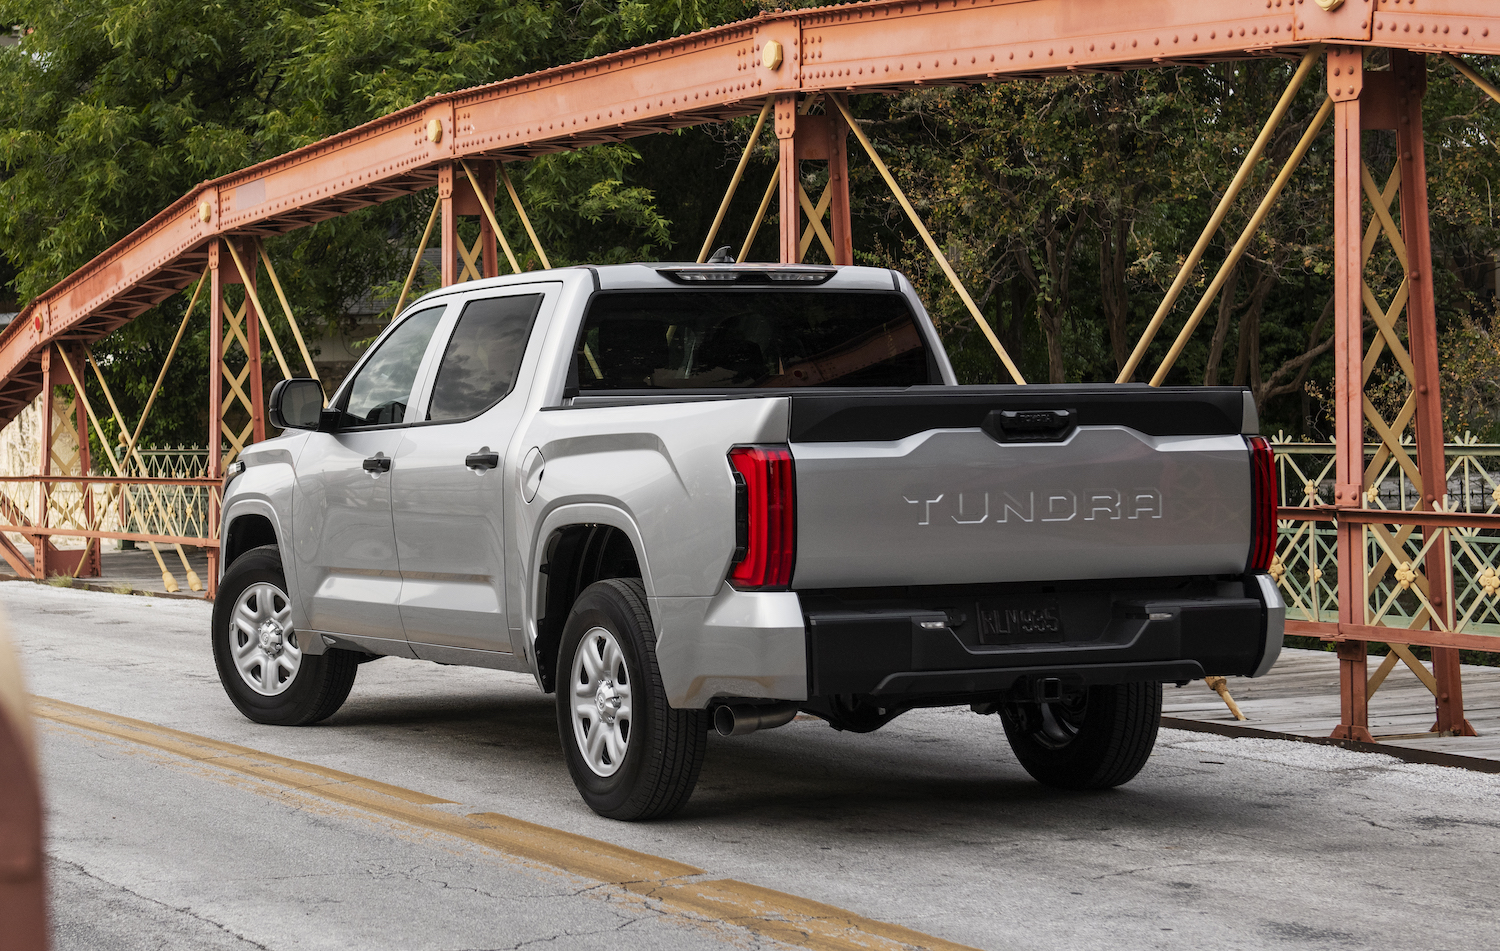 A silver, third generation Toyota Tundra parked on a bridge, facing away from the camera.